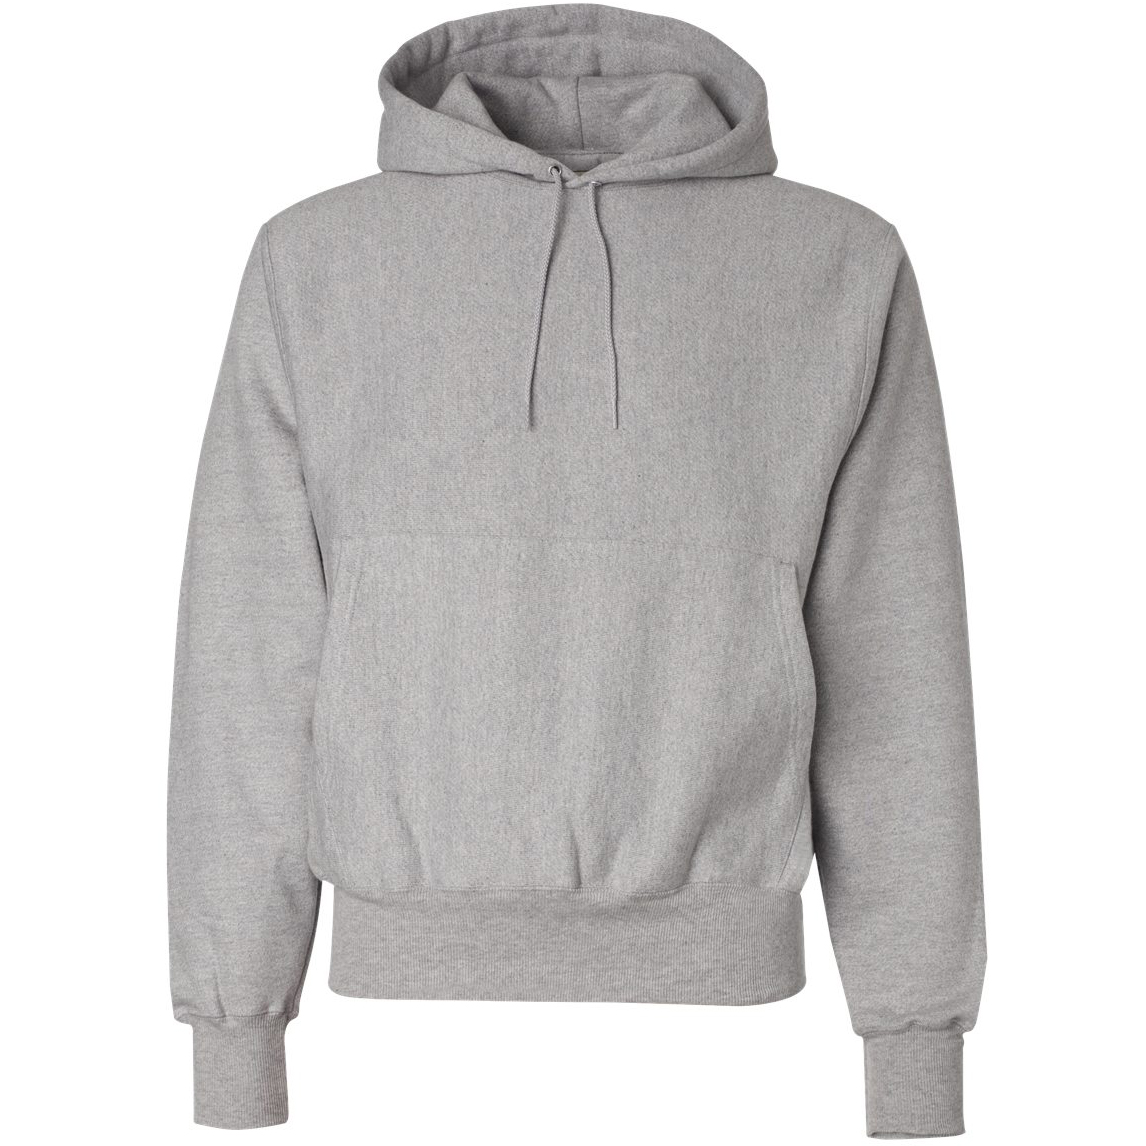 https://flare.fullsource.com/images/items/a/raw/SS-CHAMP-S101-Oxford-Grey.jpg